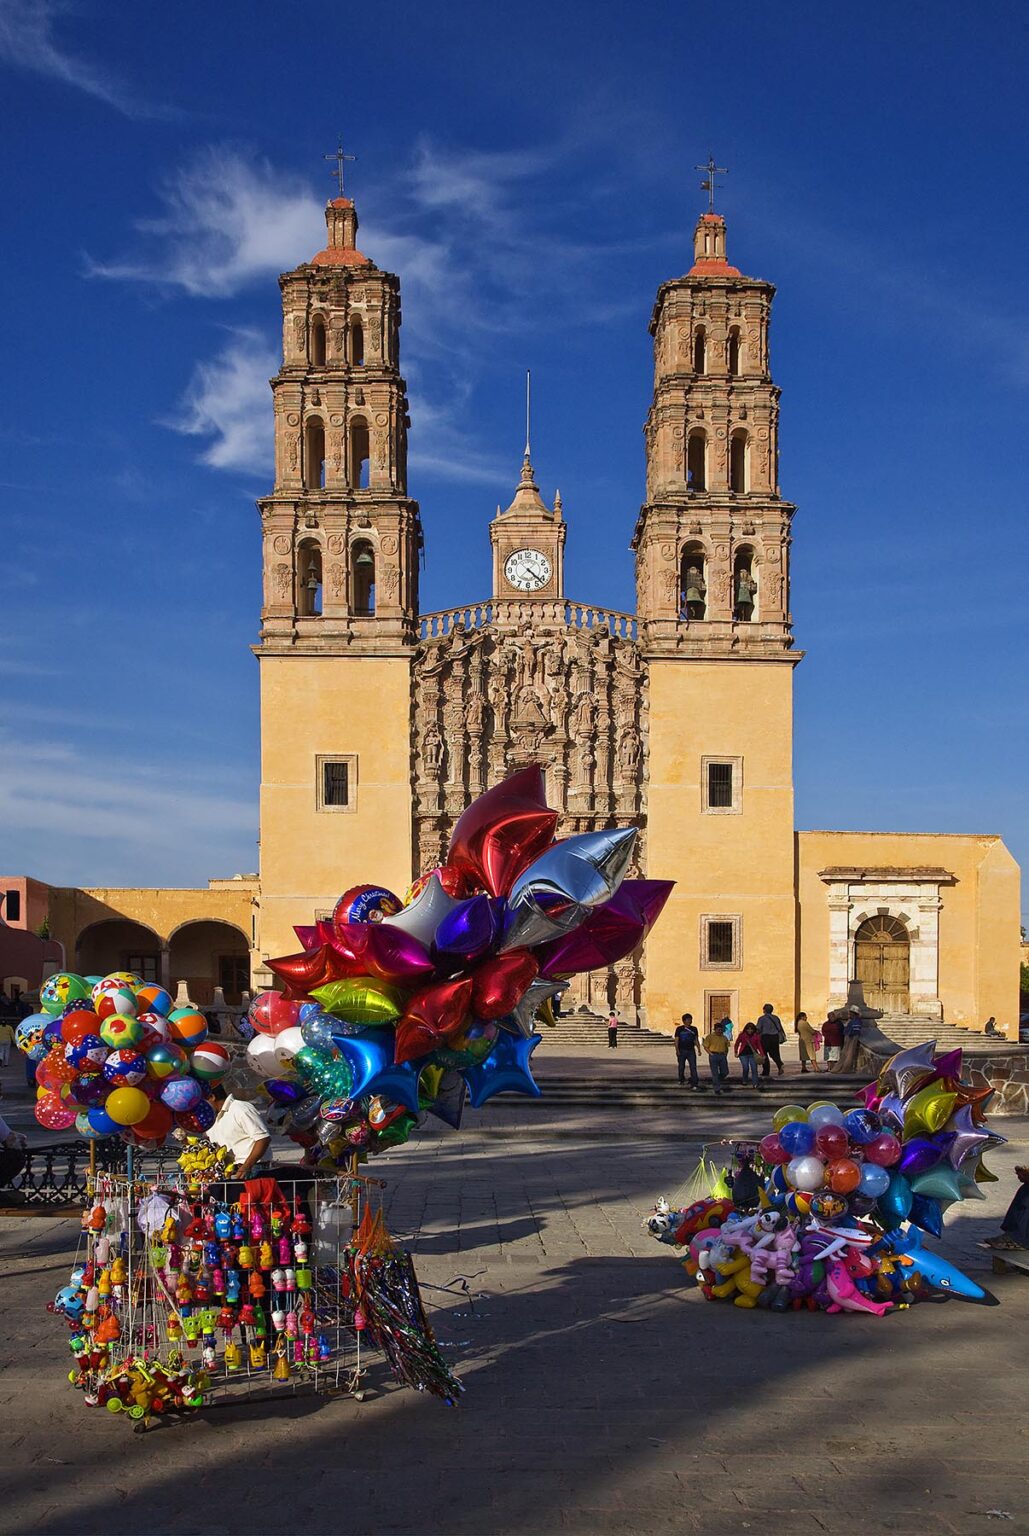 BALOONS are sold in front of the DOLORES HIDALGO CATHEDRAL built in the 16th century - GUANAJUATO, MEXICO